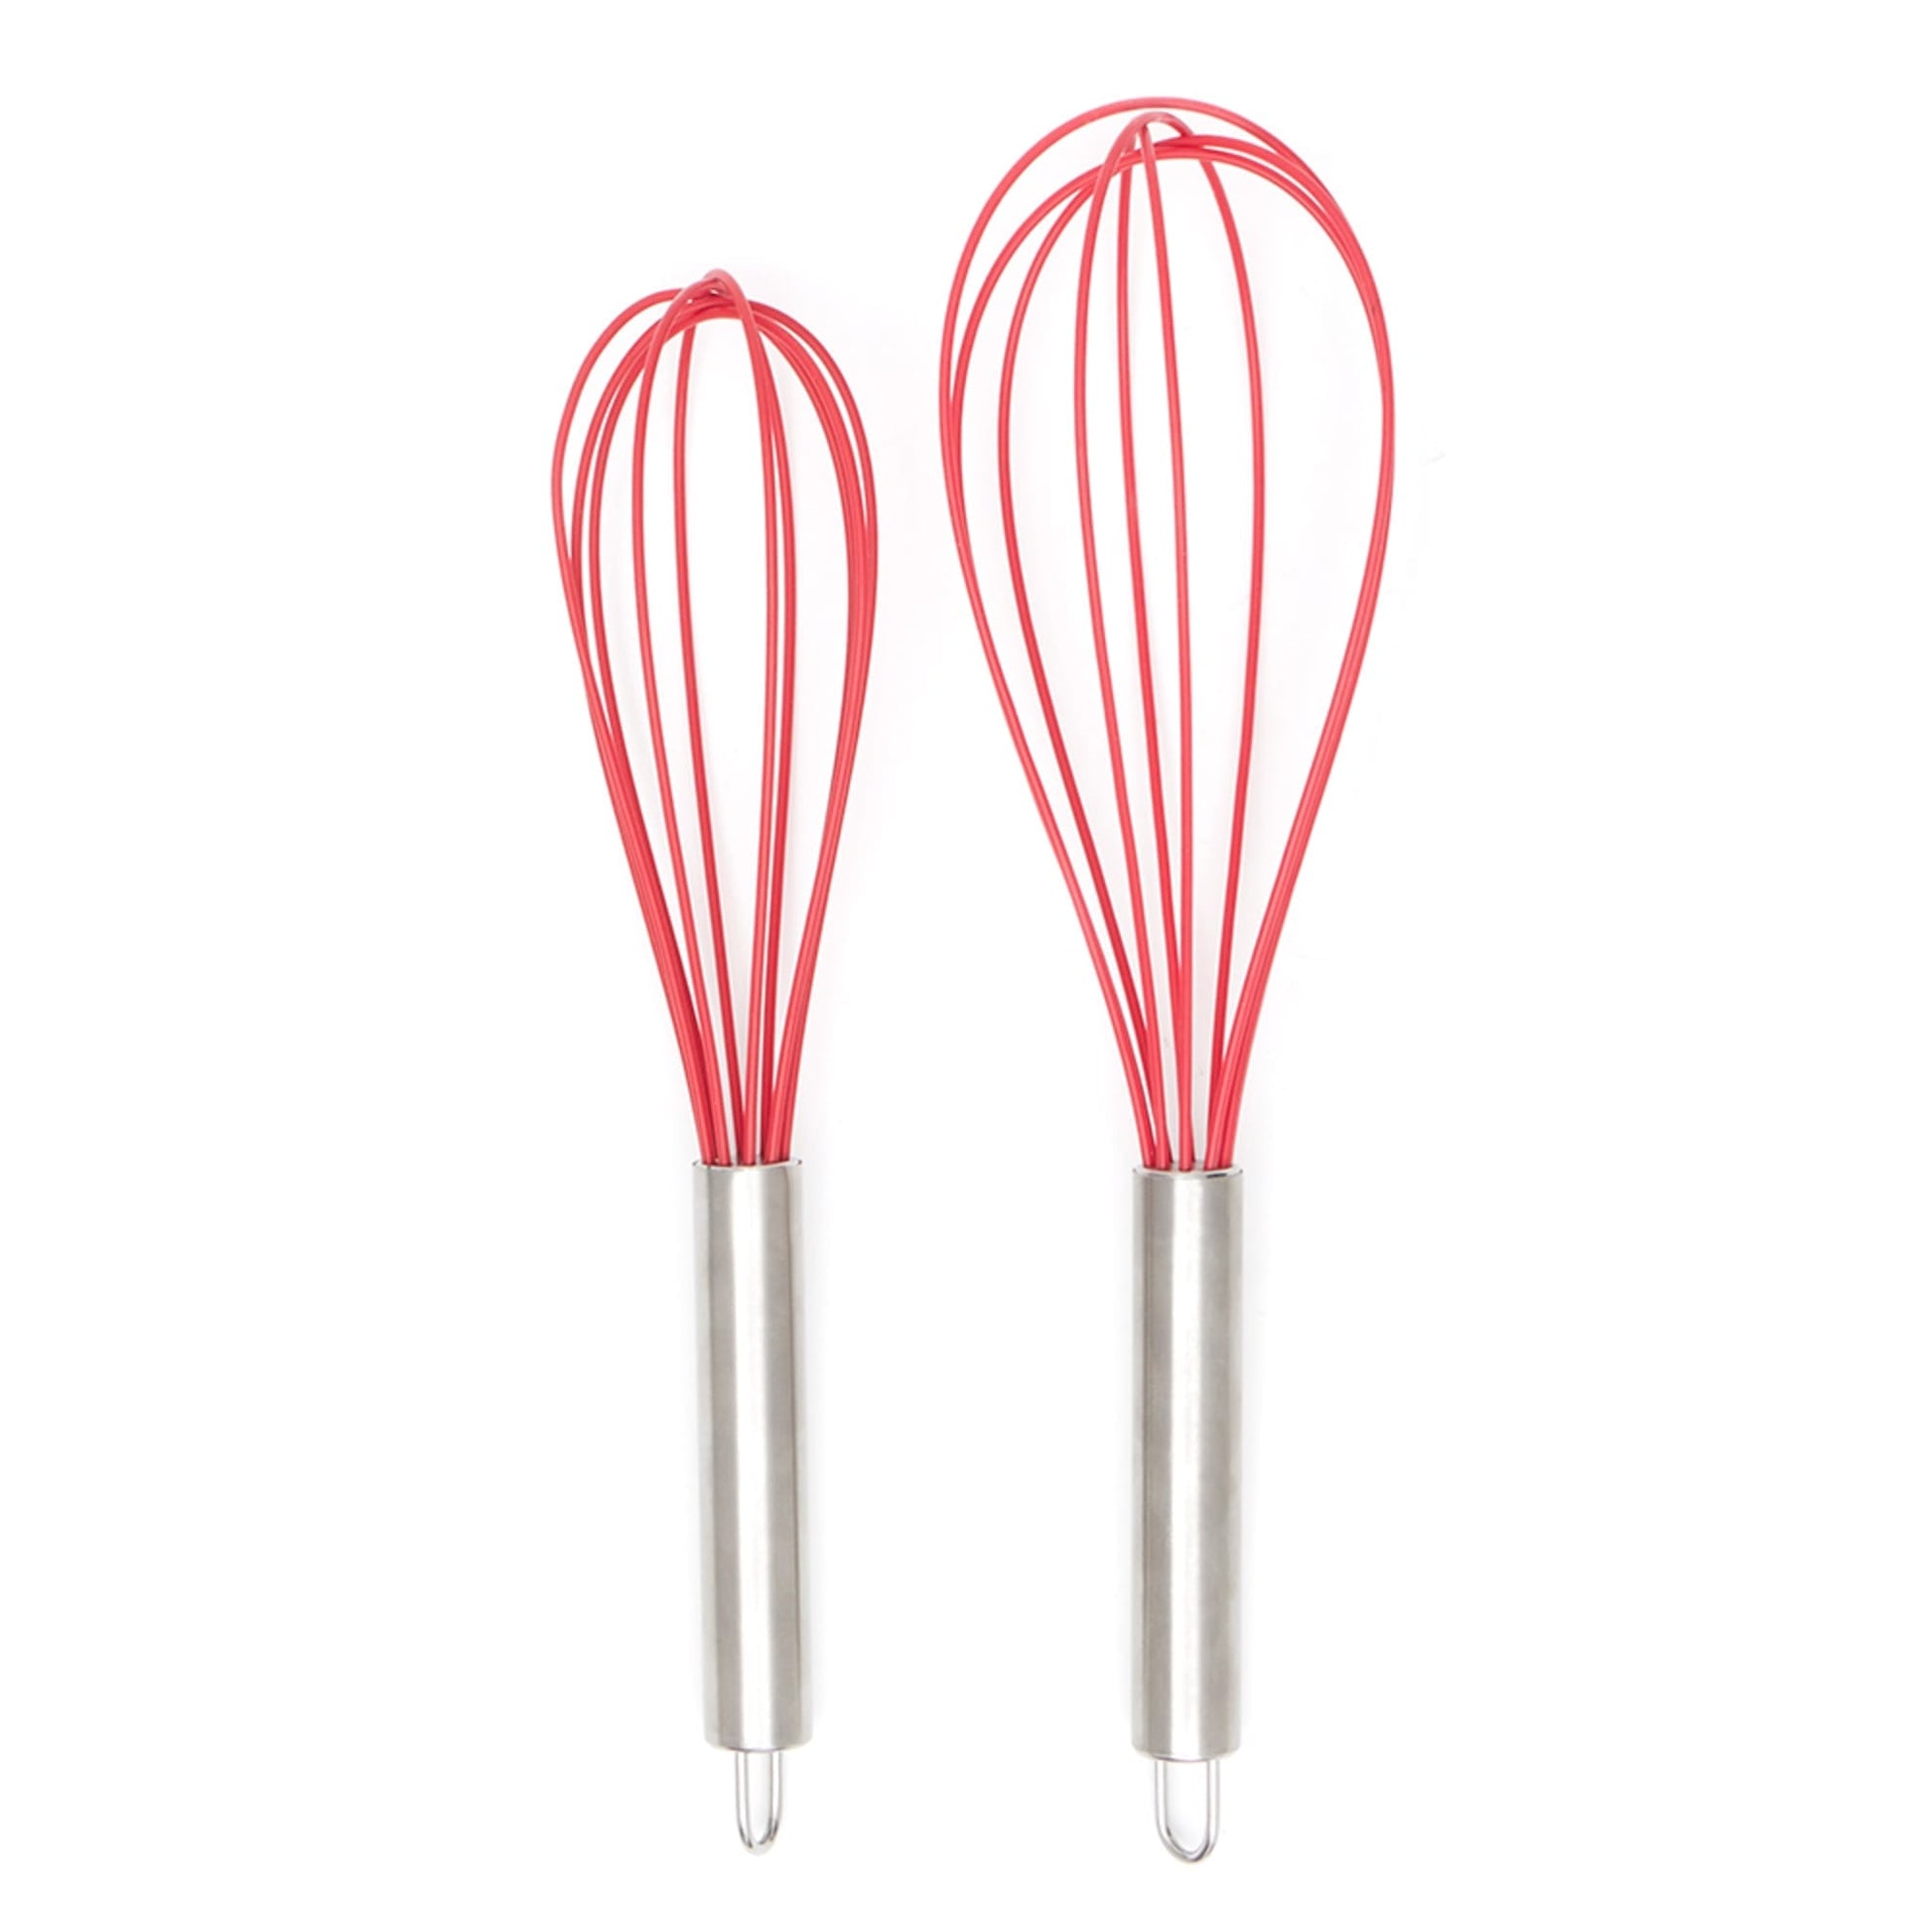 Hibalala Silicone Whisk -Heat Resistant Kitchen Whisks for Non-Stick Cookware, Balloon Egg Beater Perfect, Red